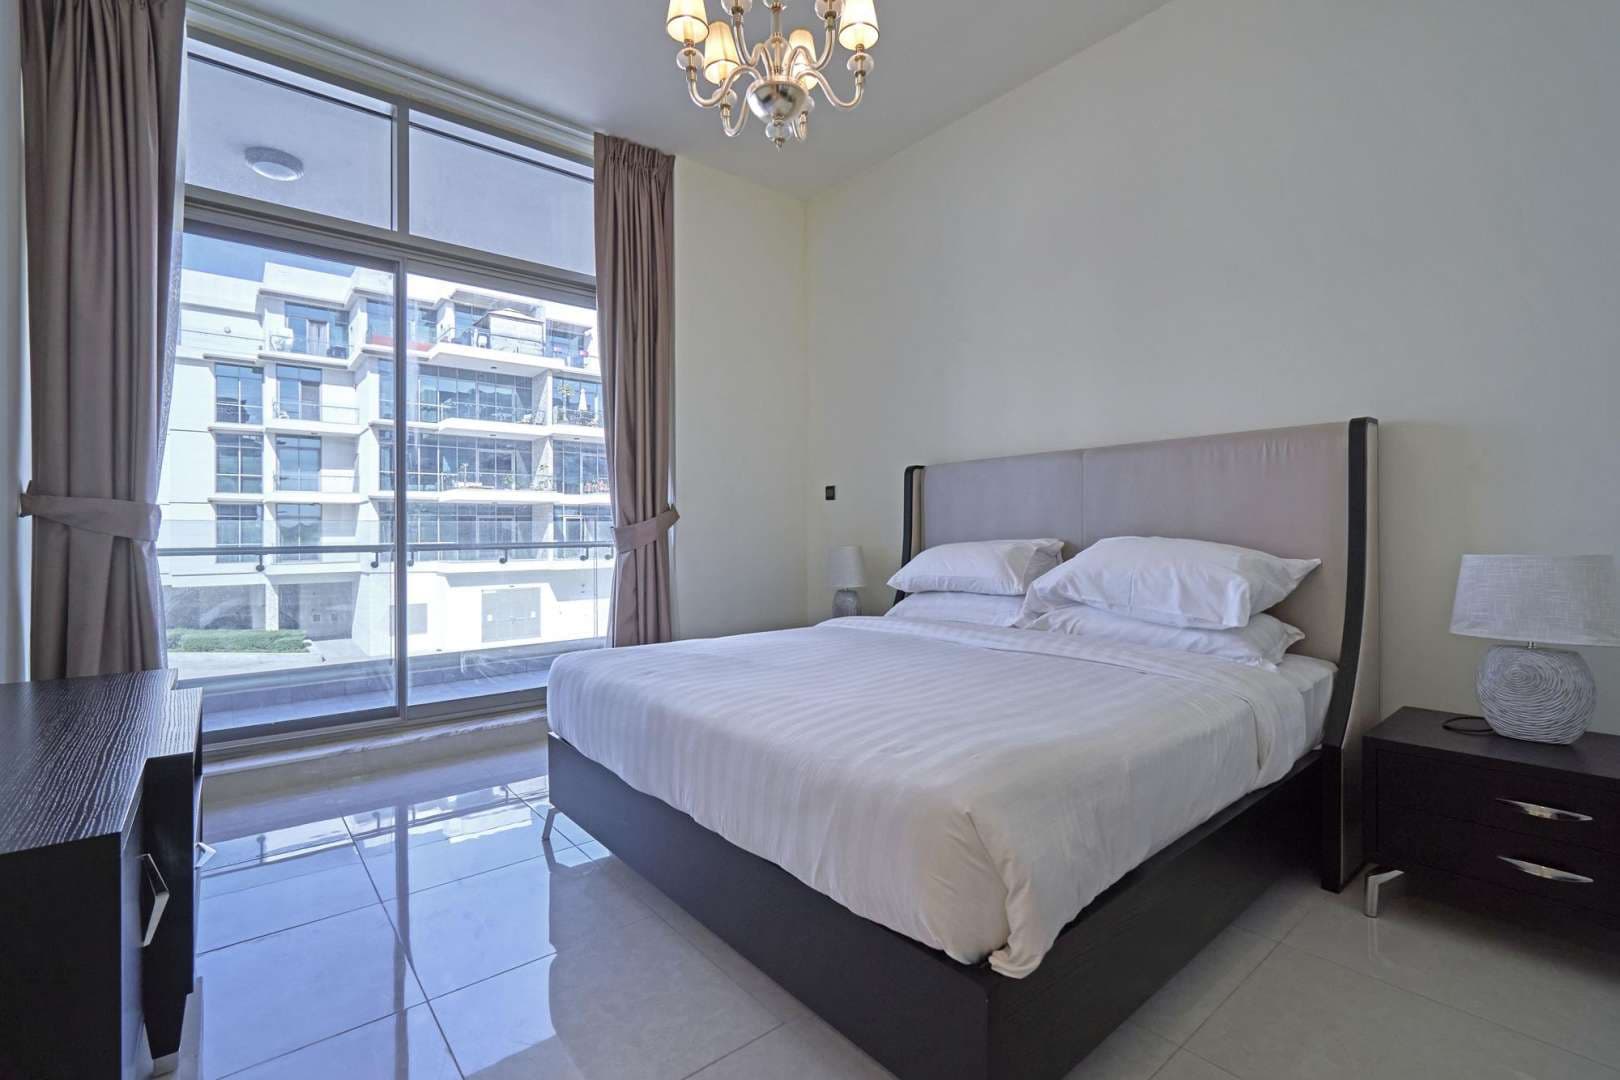 2 Bedroom Apartment For Rent The Polo Residence Lp05455 18a7a3204f1e8f00.jpg